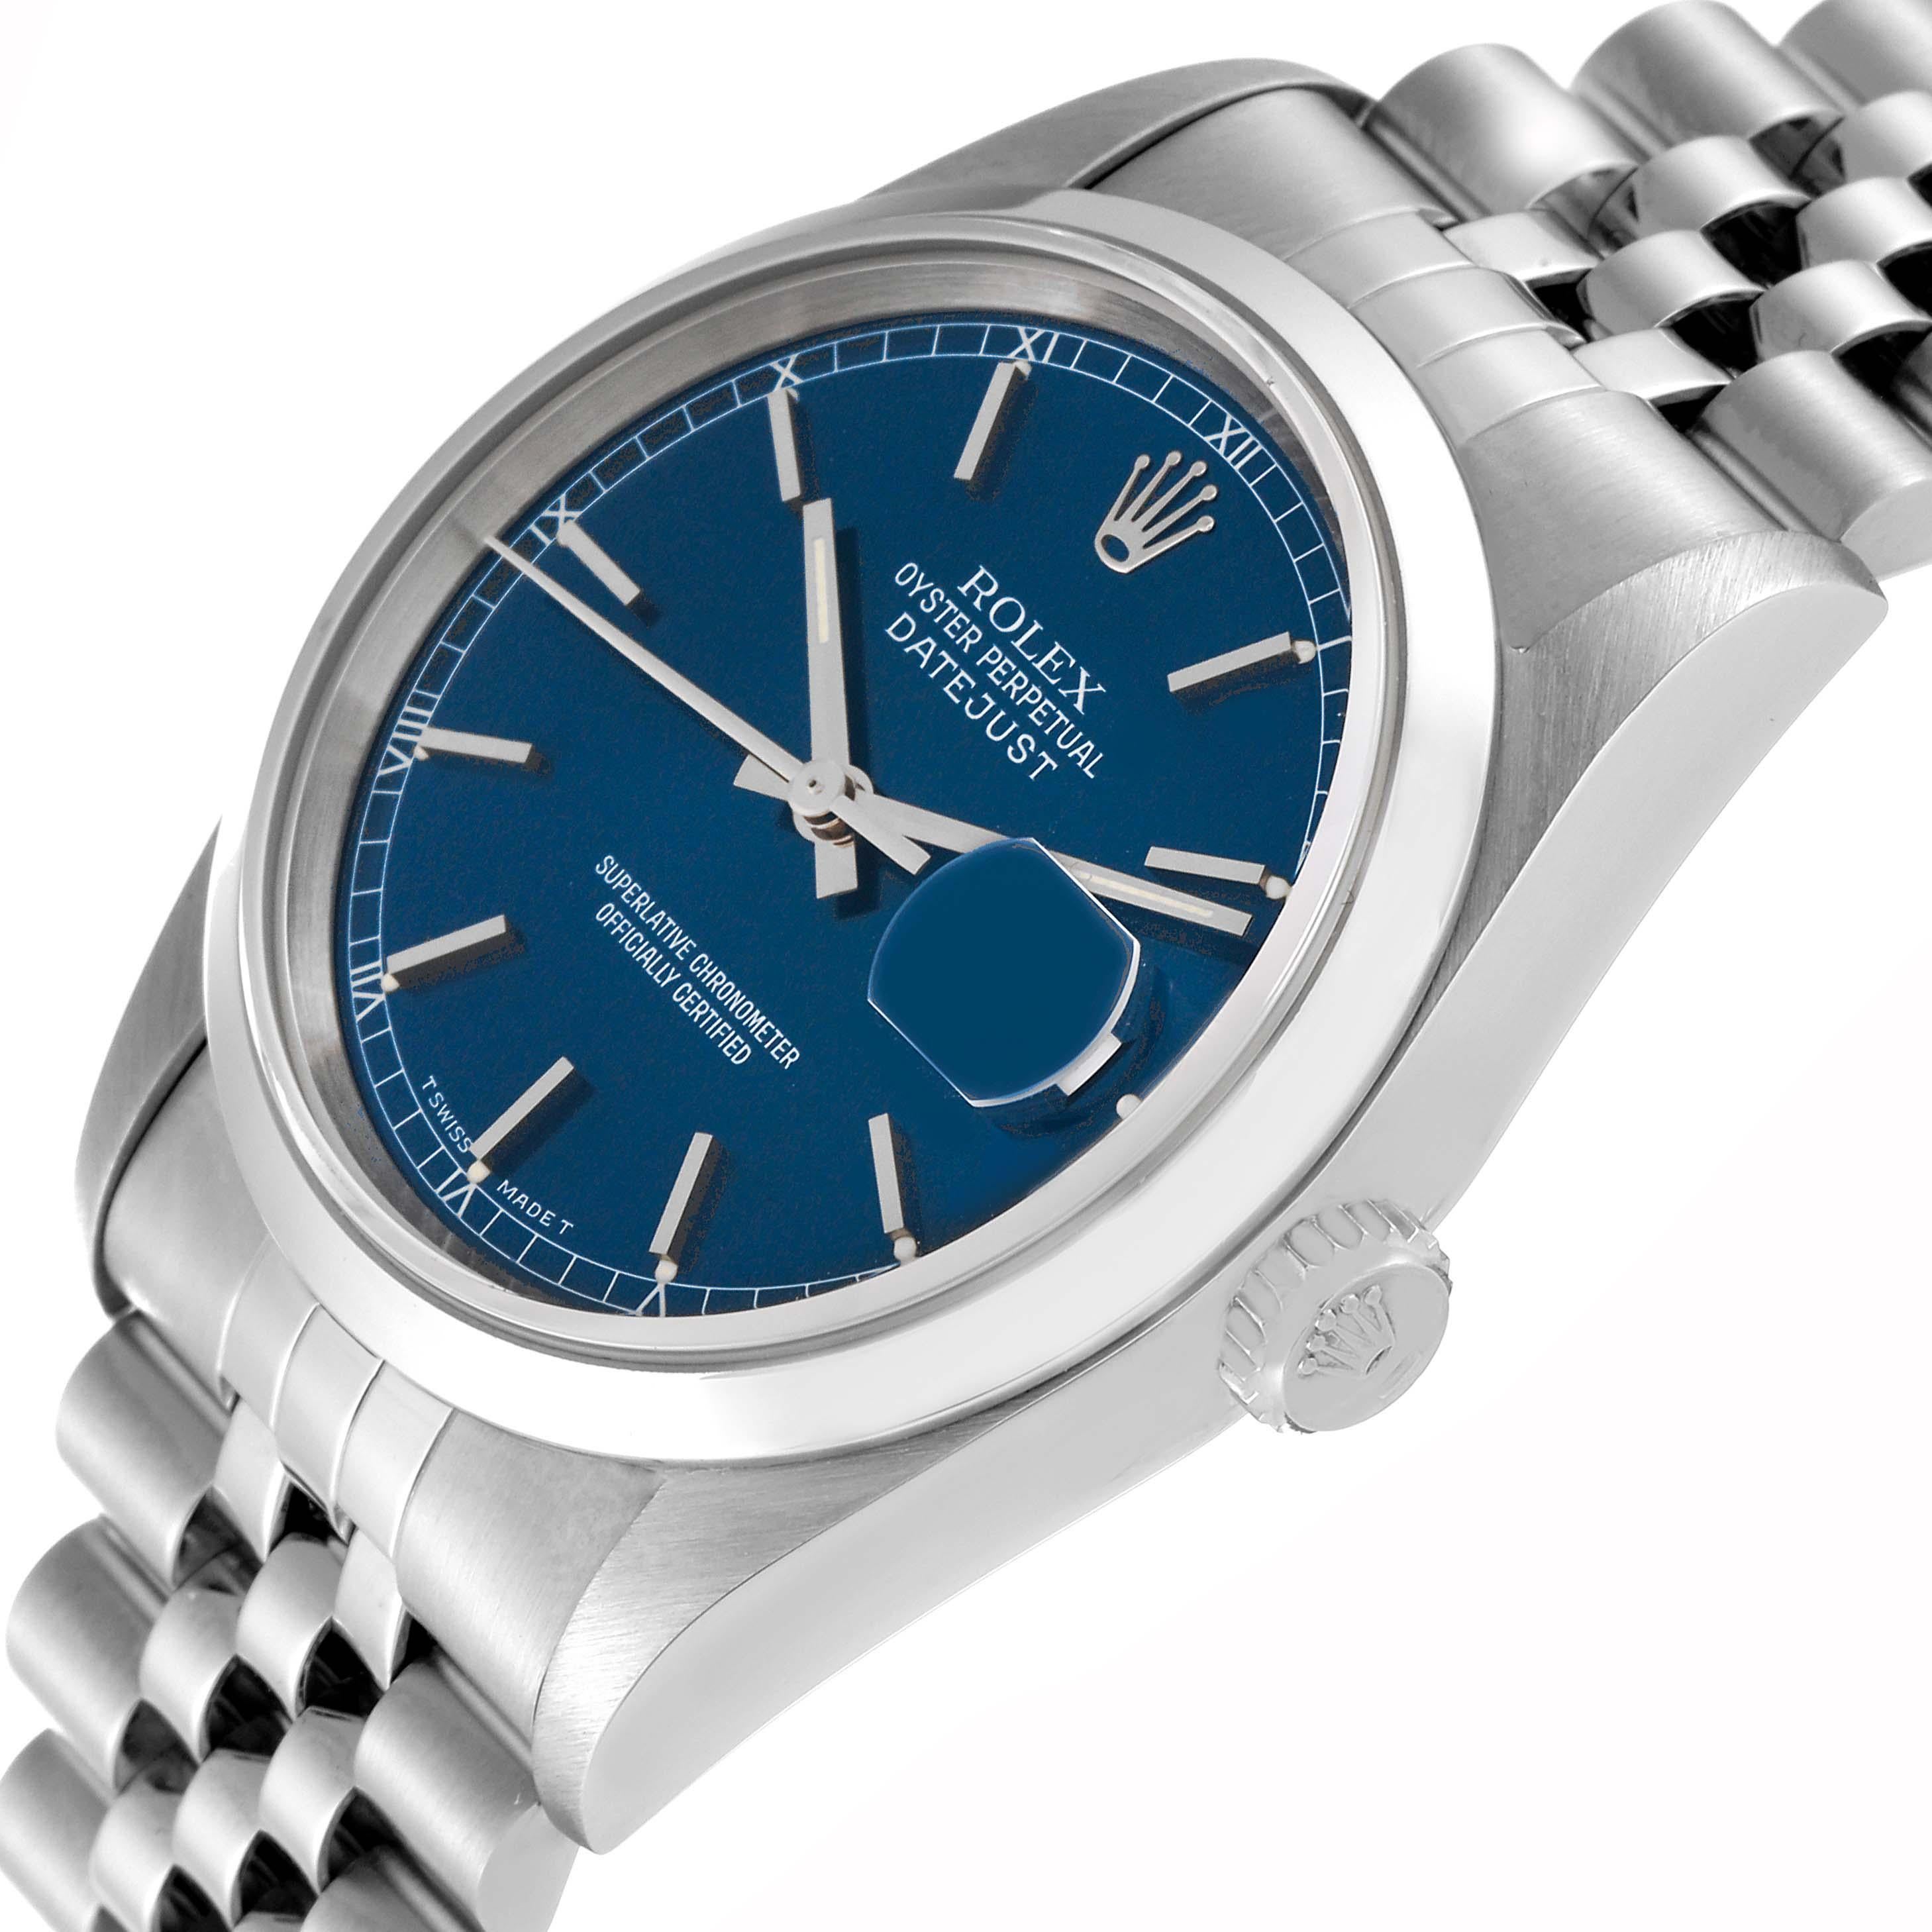 Rolex Datejust 36mm Blue Dial Smooth Bezel Steel Mens Watch 16200 Box Papers 1